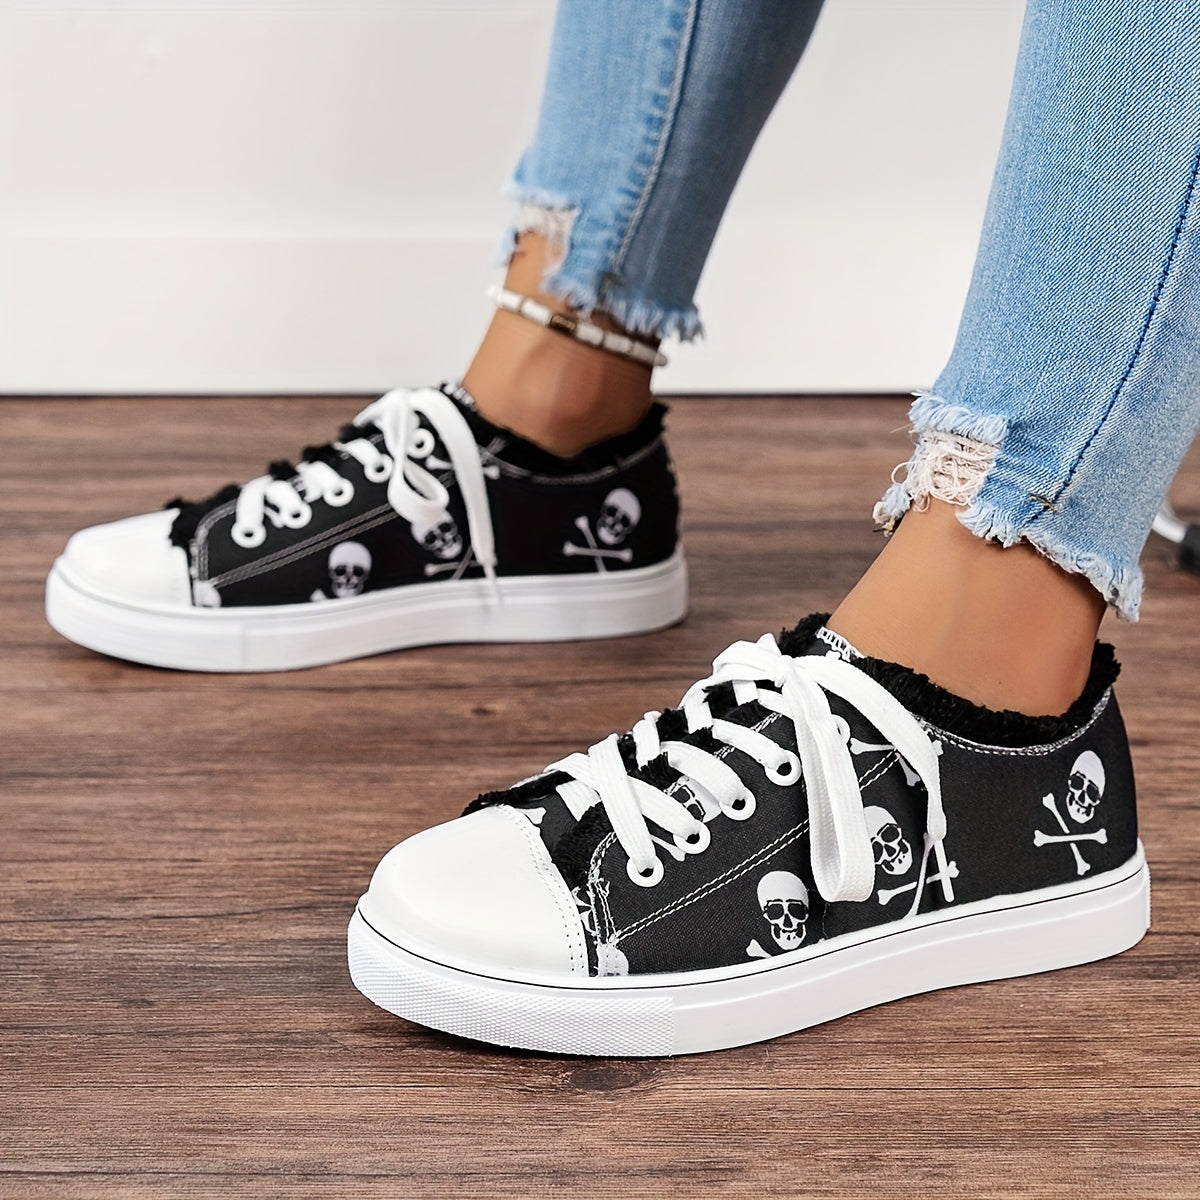 Women's Skull Pattern Canvas Shoes, Casual Lace Up Low Top Shoes, Lightweight Outdoor Halloween Sneakers